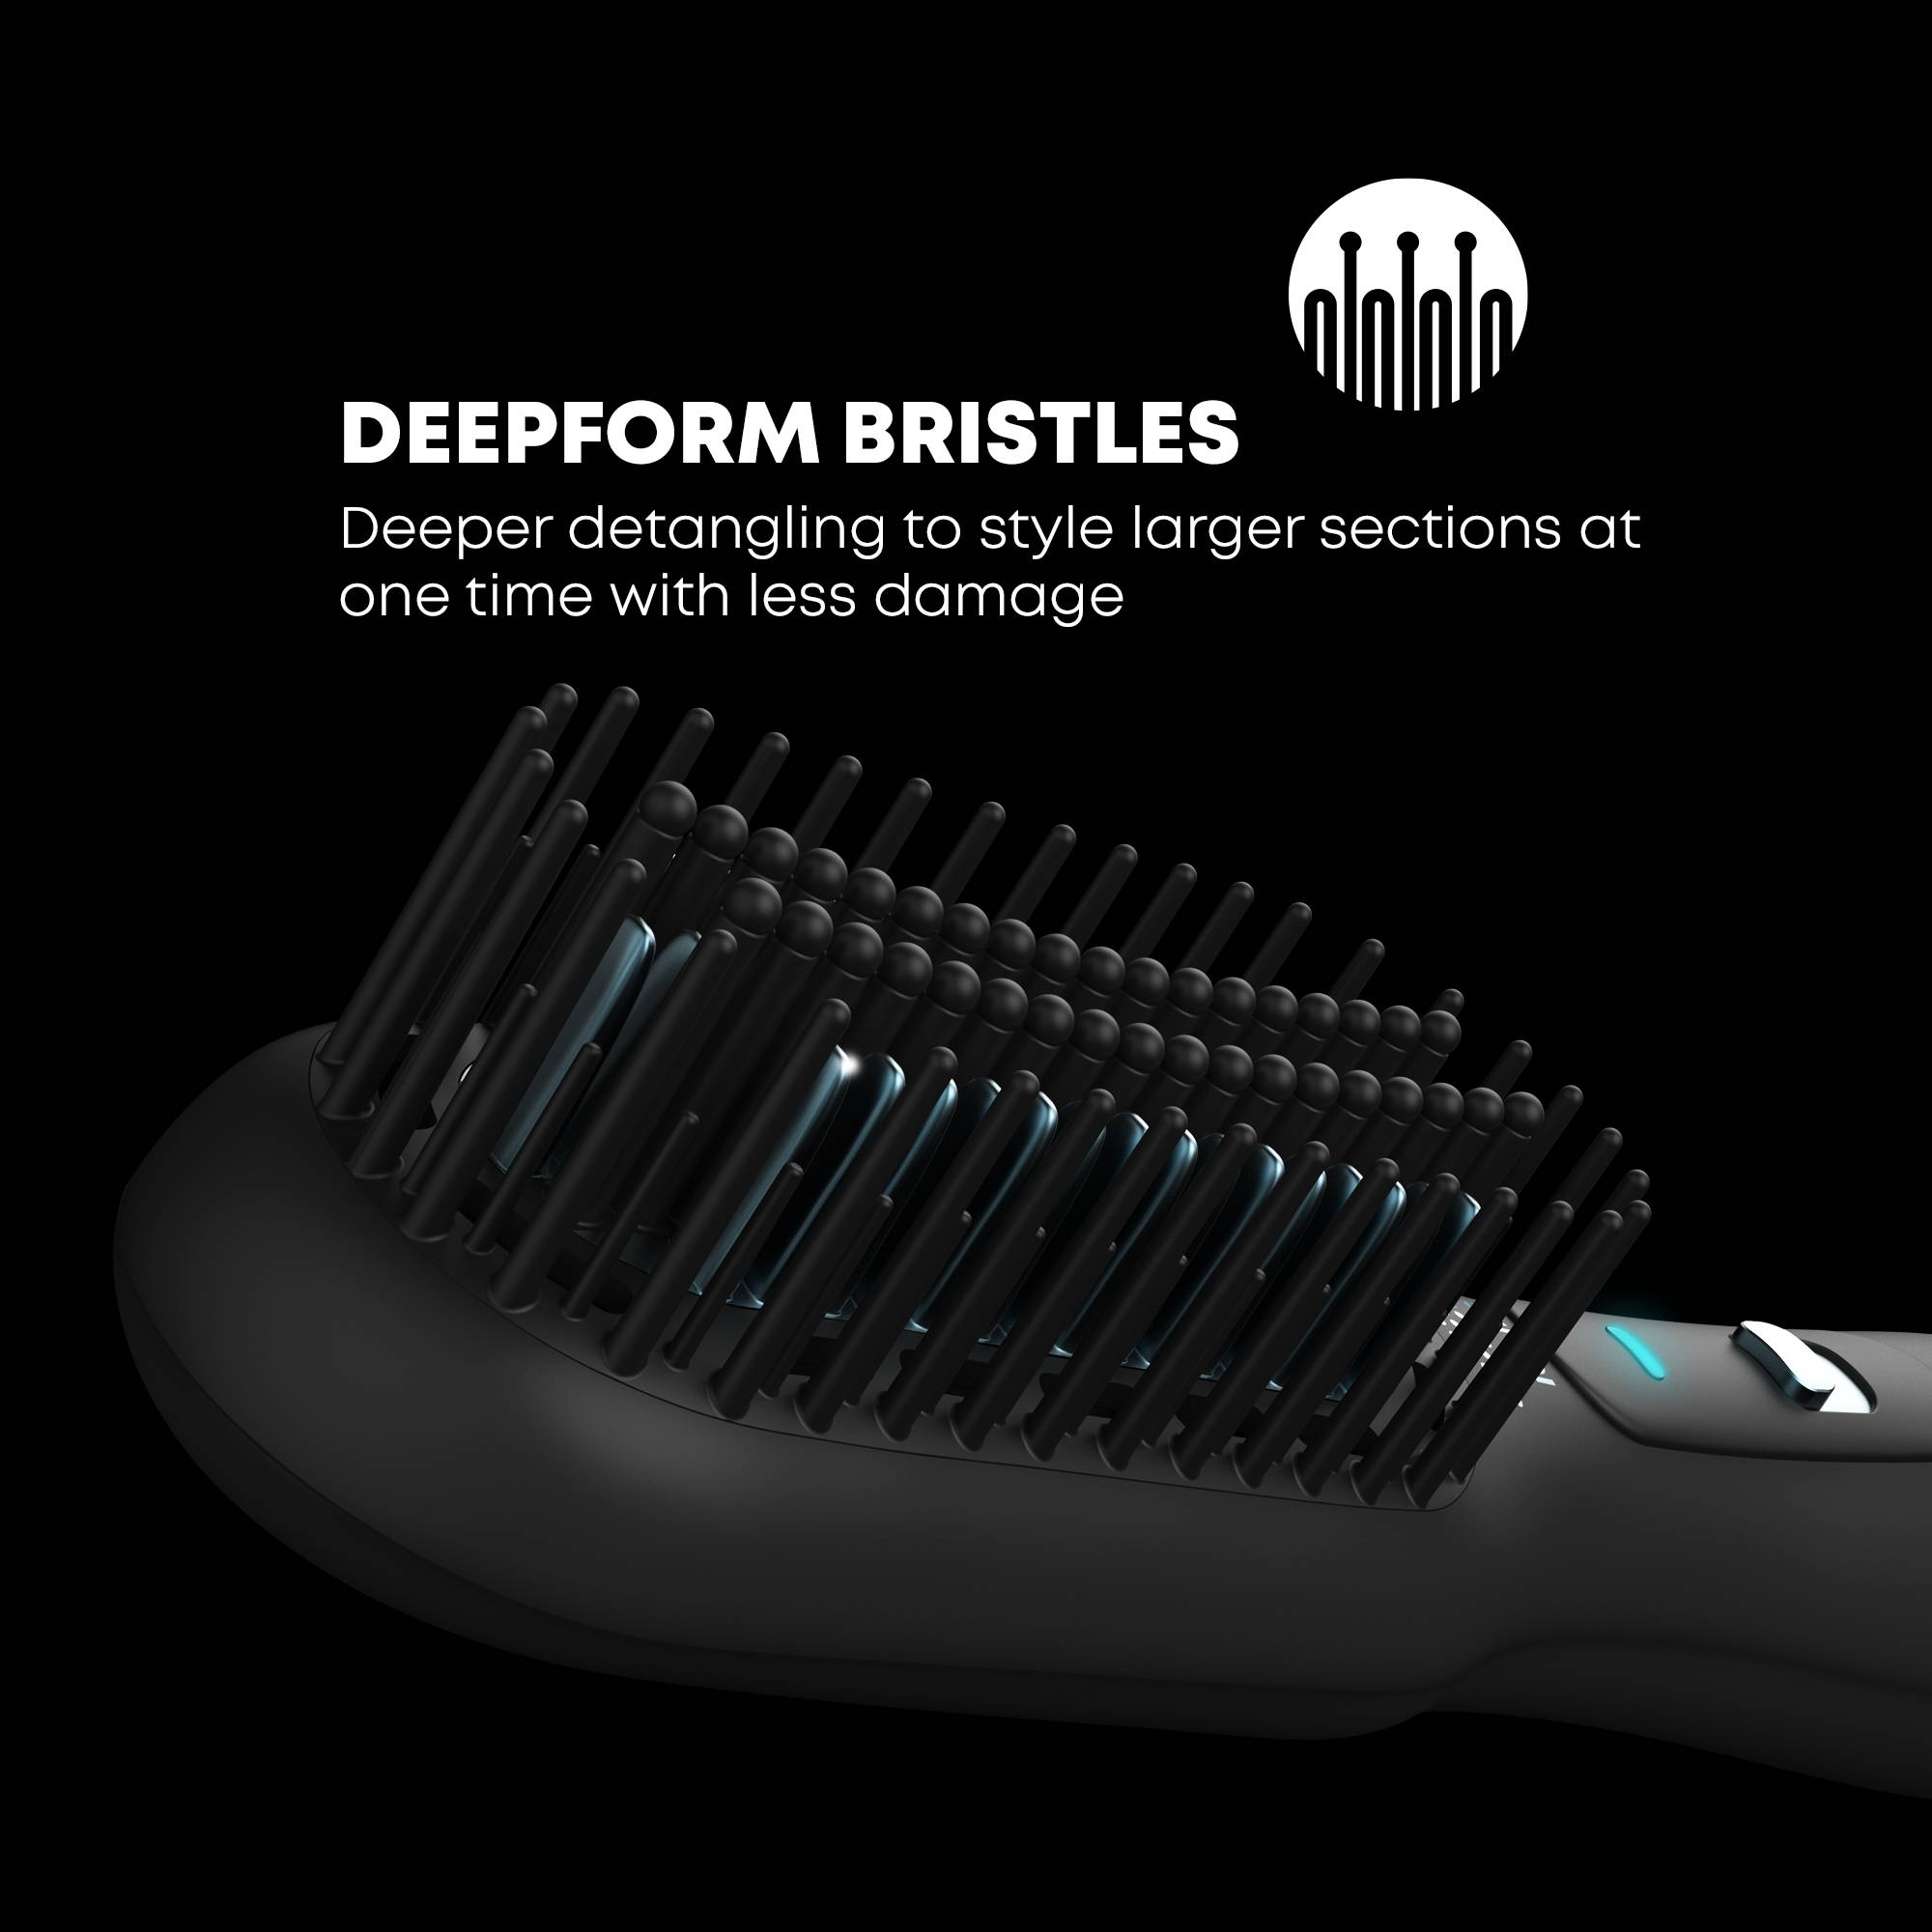 Deepform detangling bristles and ceramic bristles for smooth, straight hairstyles. 